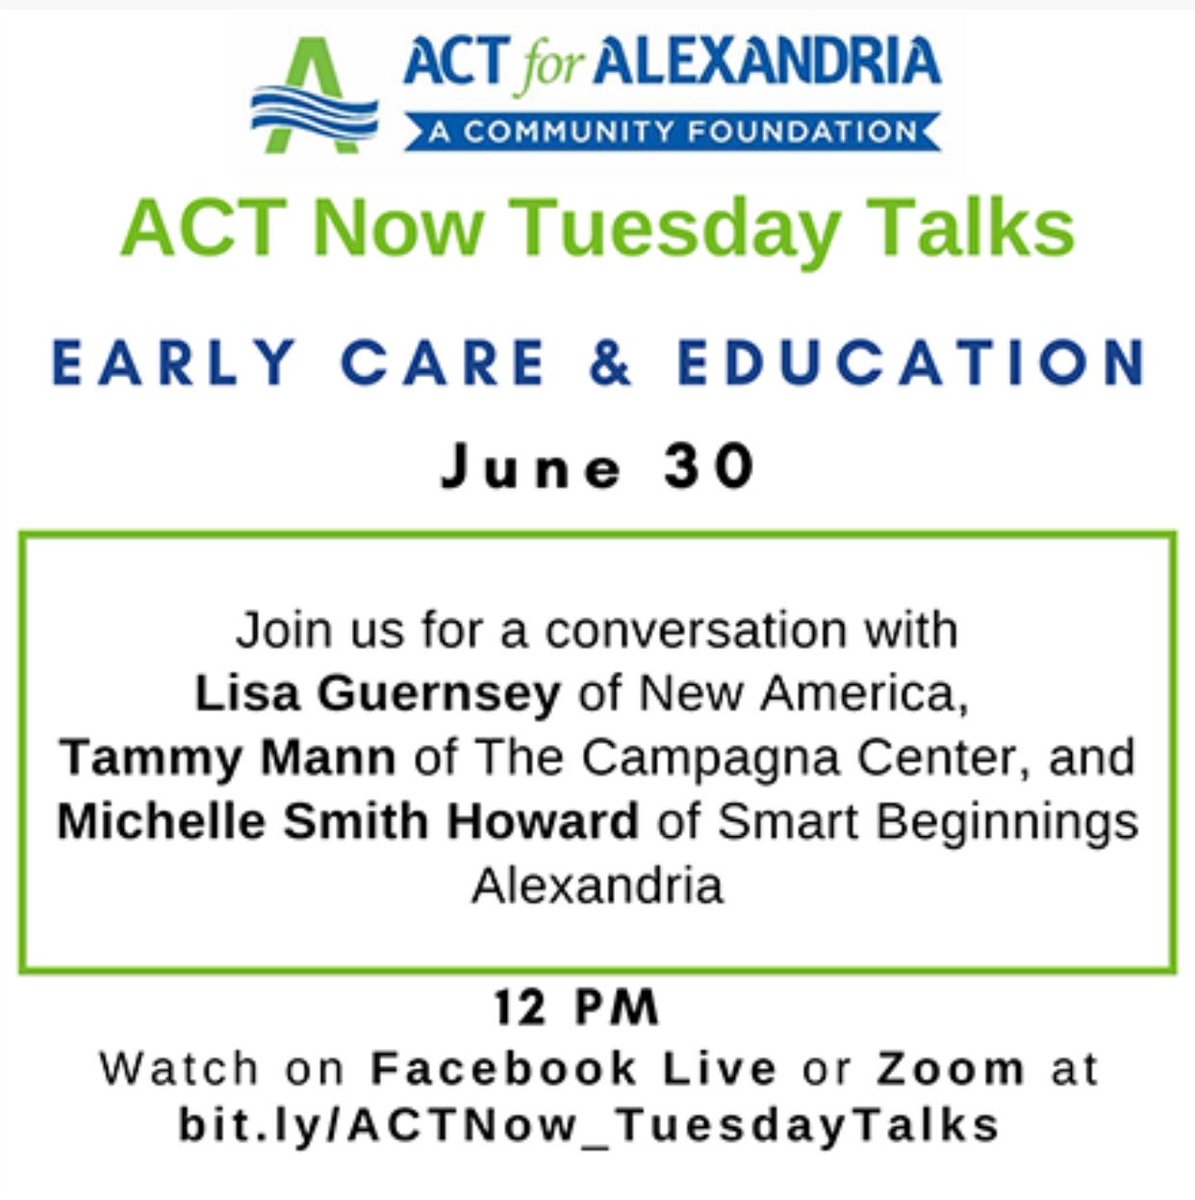 Join us and ACT for Alexandria today at 12 PM ET for a conversation on Early Care & Education. 

Visit @ACTforAlexandria to watch on Facebook Live or tune in on Zoom at bit.ly/ACTNow_Tuesday….

#alexandriava